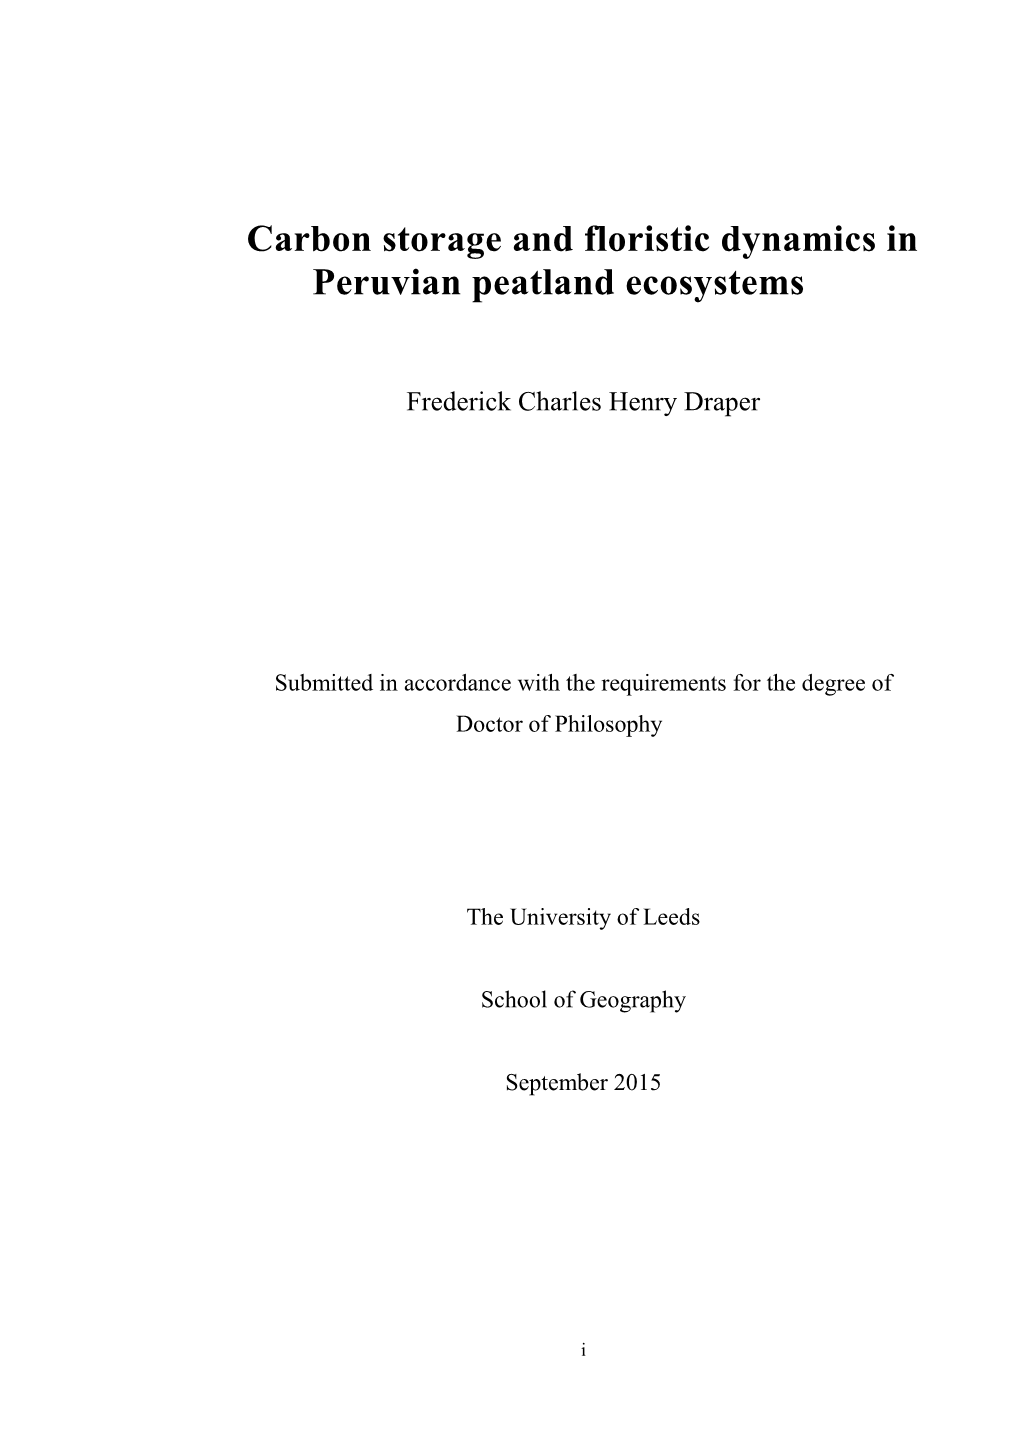 Carbon Storage and Floristic Dynamics in Peruvian Peatland Ecosystems